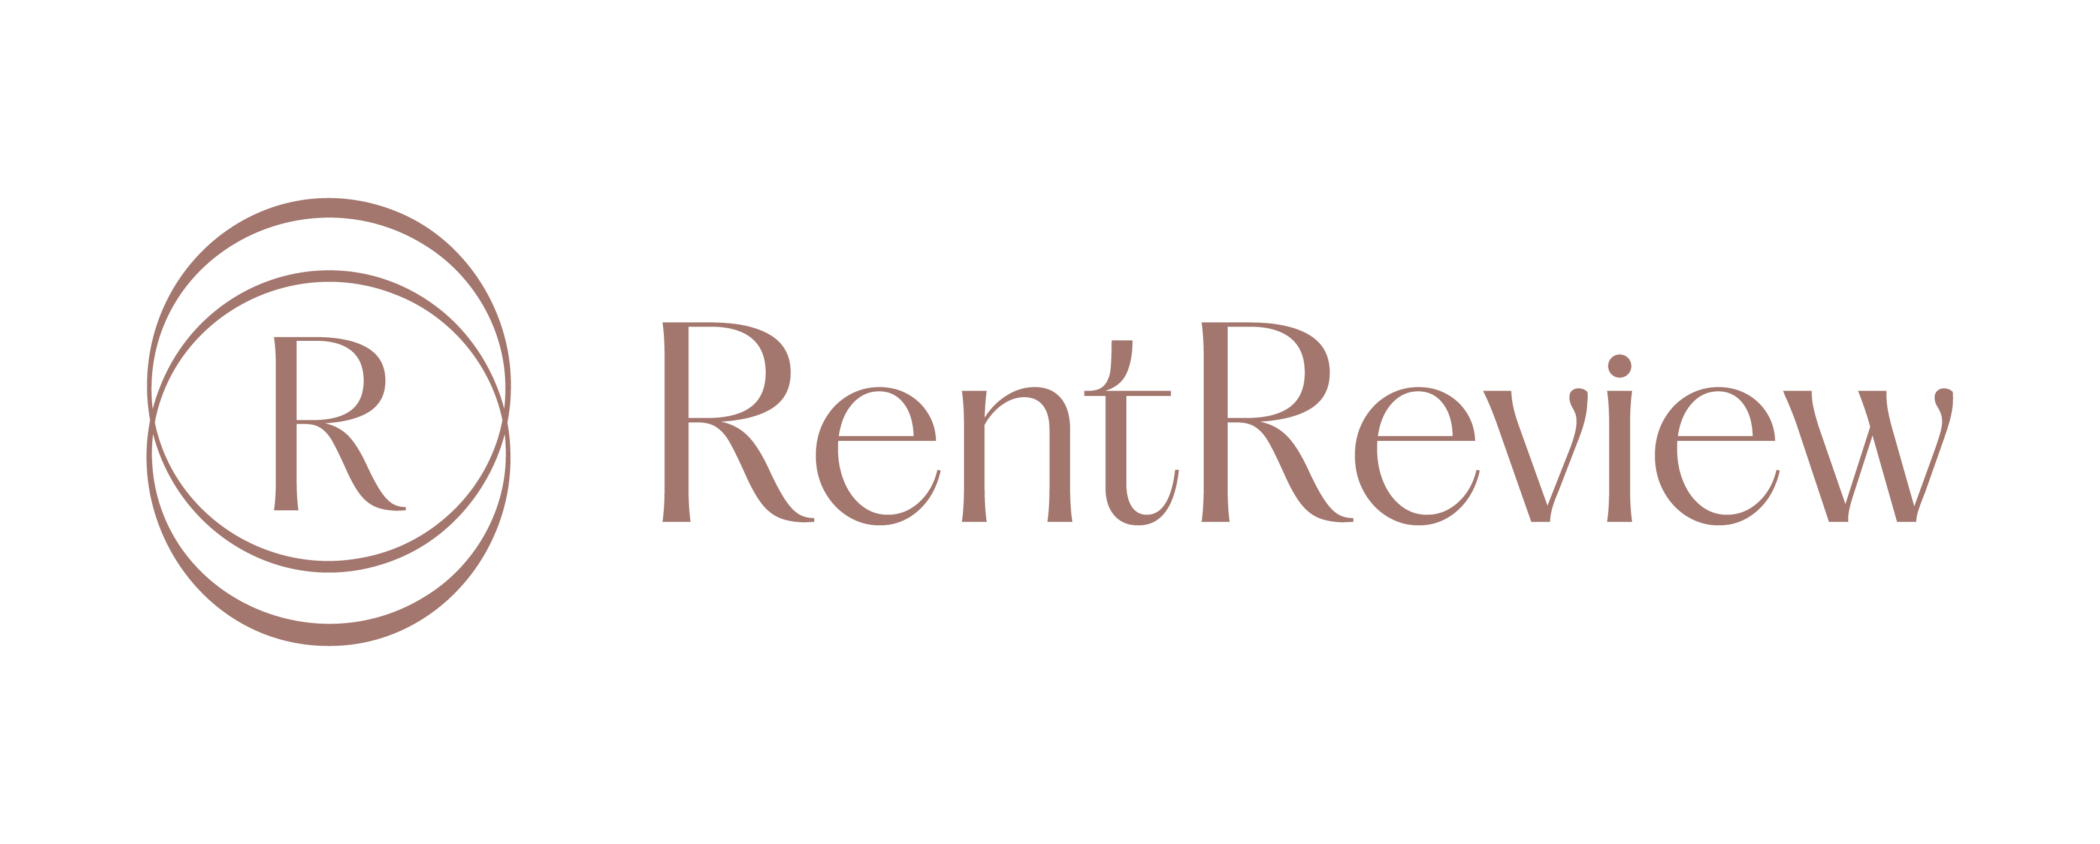 RentReview